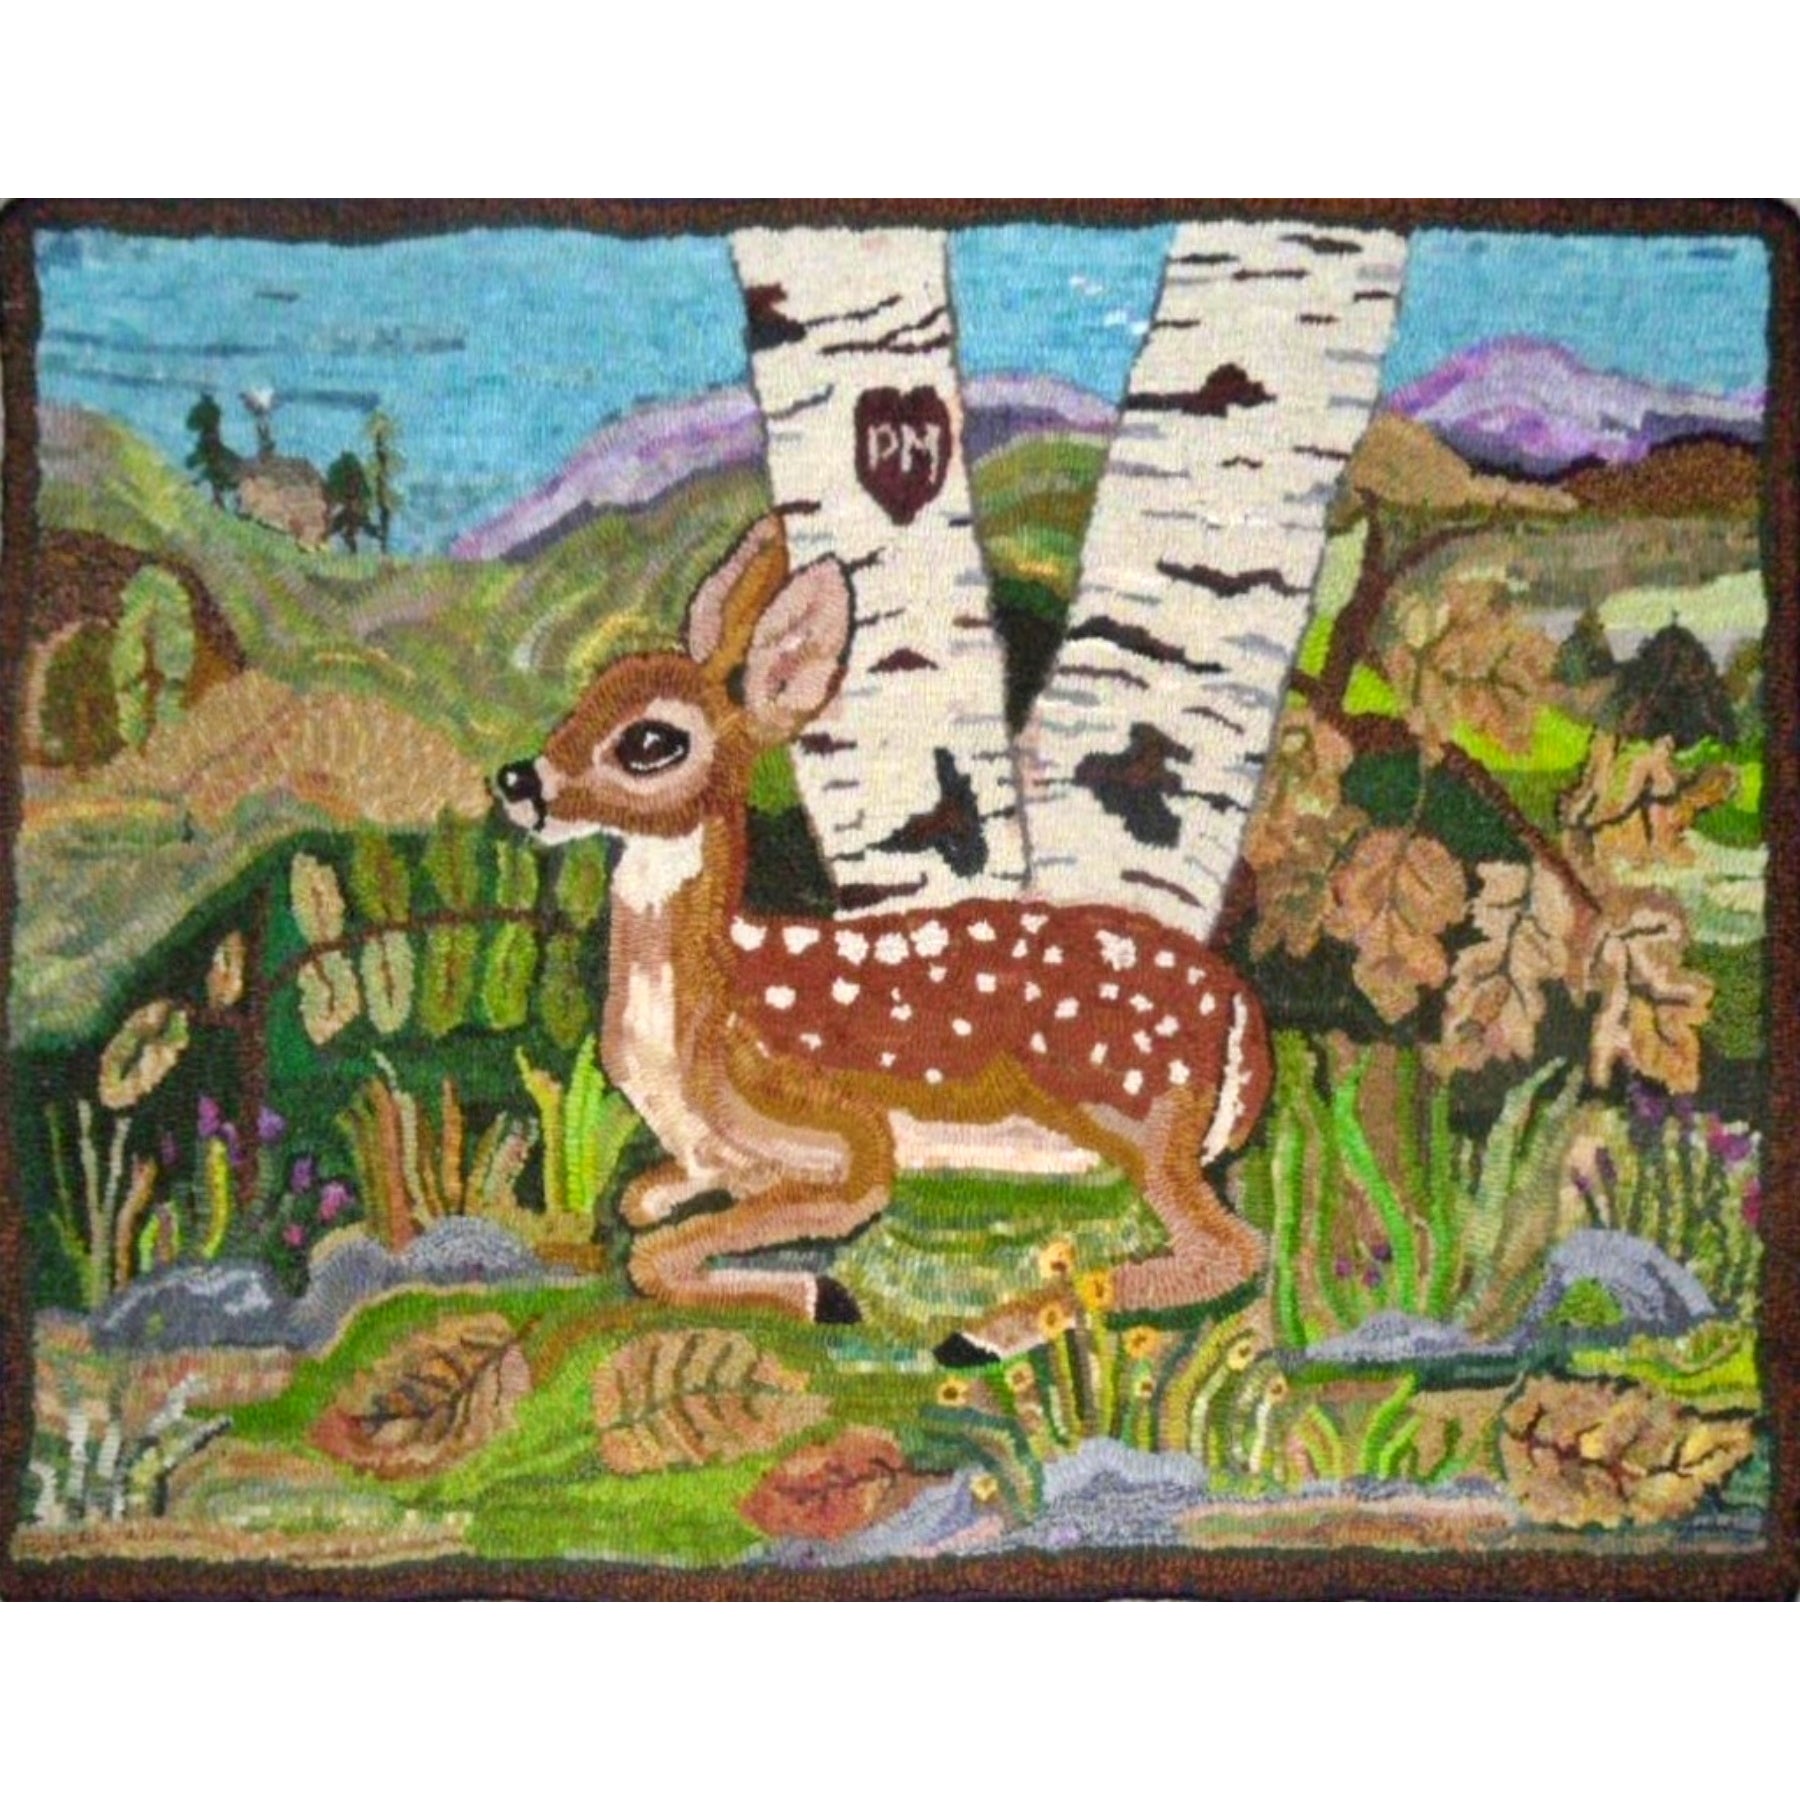 Solitude, rug hooked by Patti Murray